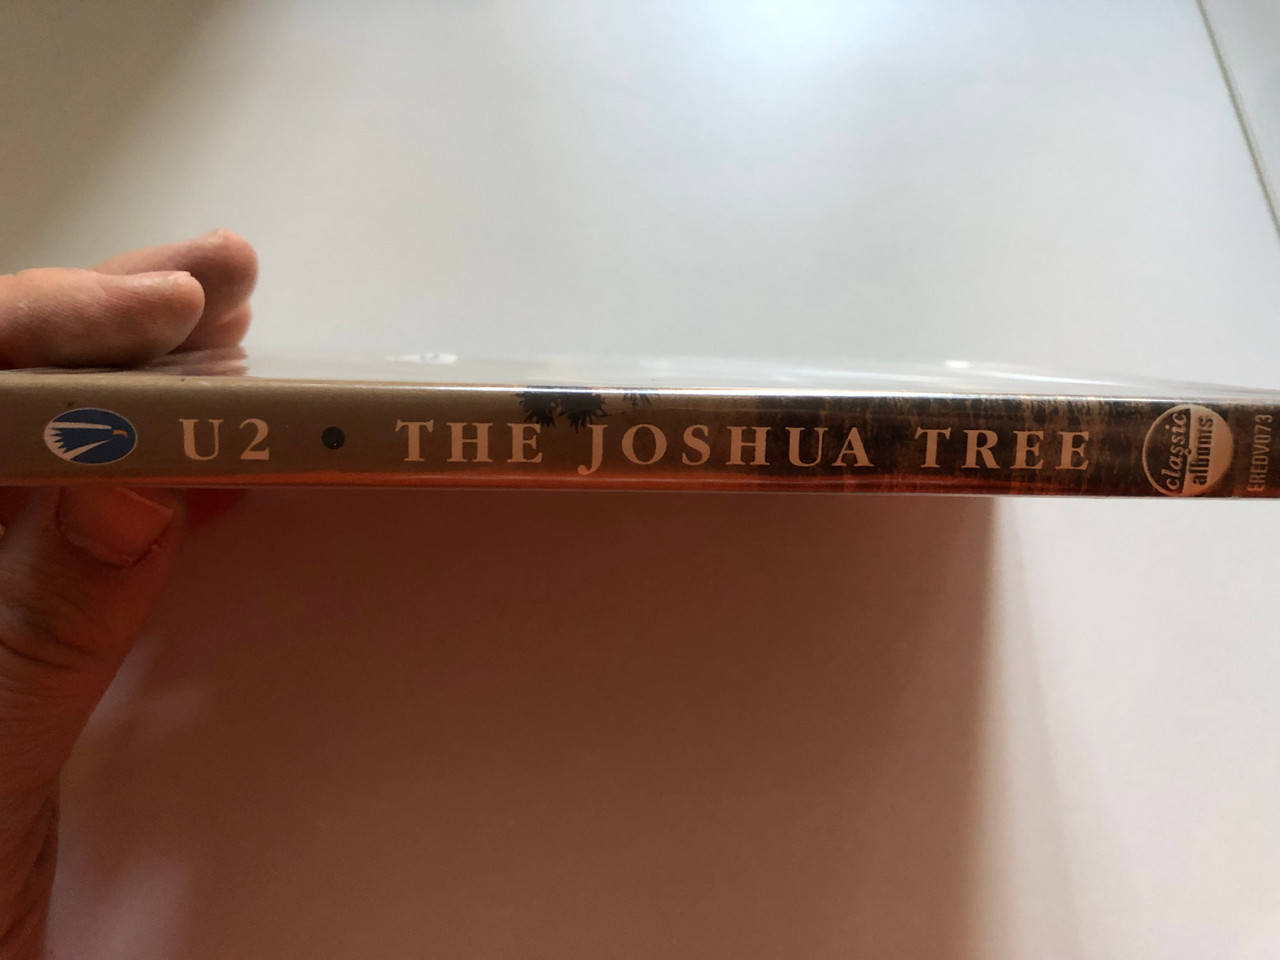 https://cdn10.bigcommerce.com/s-62bdpkt7pb/products/0/images/259520/U2_The_Joshua_Tree_Classic_Albums_Featuring_cuts_from_Where_The_Streets_Have_No_Name_With_Or_Without_You_I_Still_Havent_Found_What_Im_Looking_For_Bullet_The_Blue_Sky_Eagle_Rock_Ent_3__76347.1669378946.1280.1280.JPG?c=2&_gl=1*189r50b*_ga*MjA2NTIxMjE2MC4xNTkwNTEyNTMy*_ga_WS2VZYPC6G*MTY2OTM3MzQ2NS42NDUuMS4xNjY5Mzc4NzgxLjQ1LjAuMA..